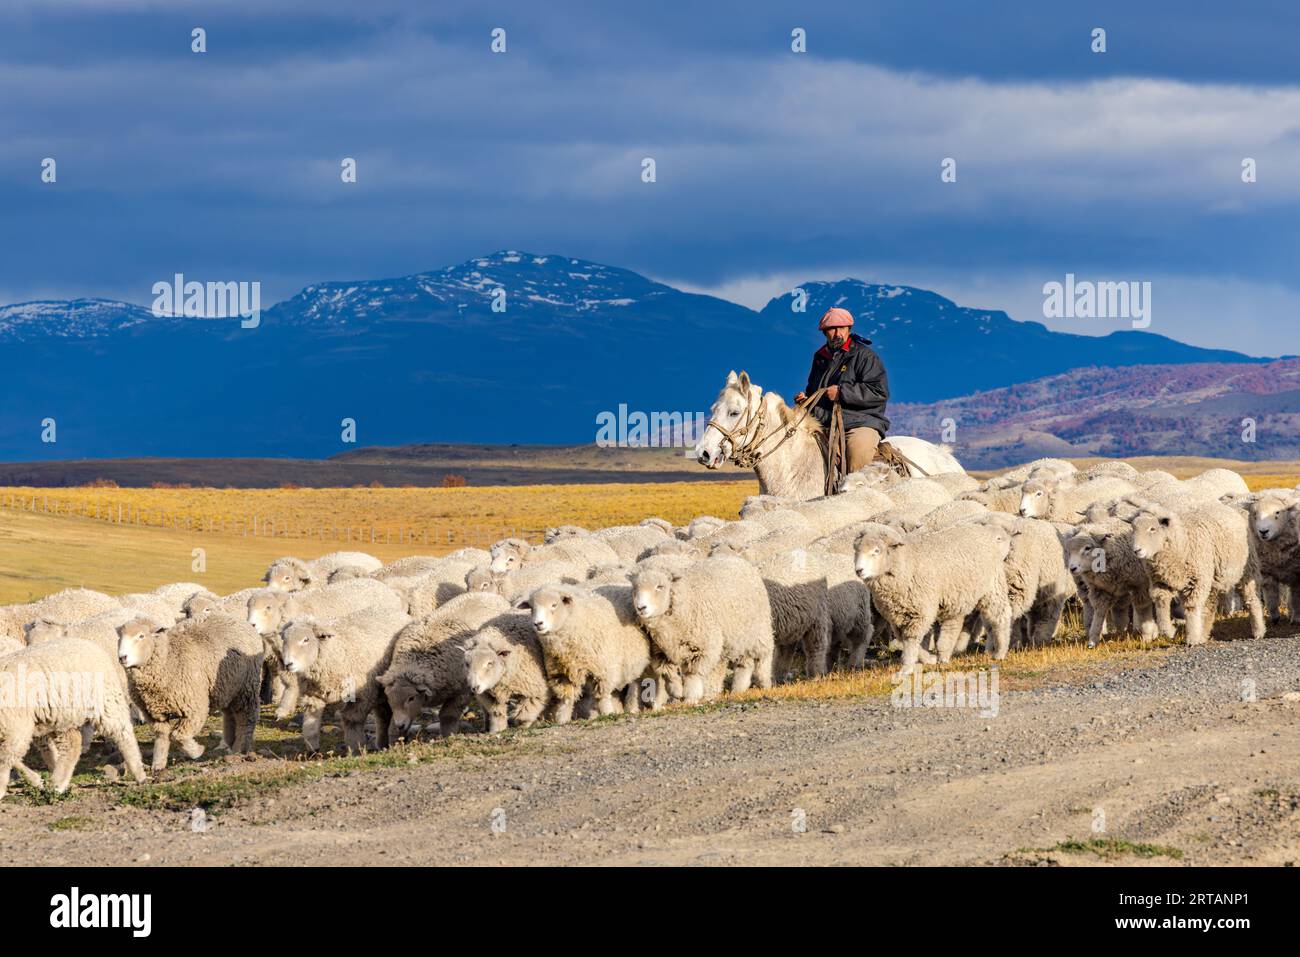 A traditional gaucho on horseback driving sheep at an estancia farm in Chile, Patagonia Stock Photo